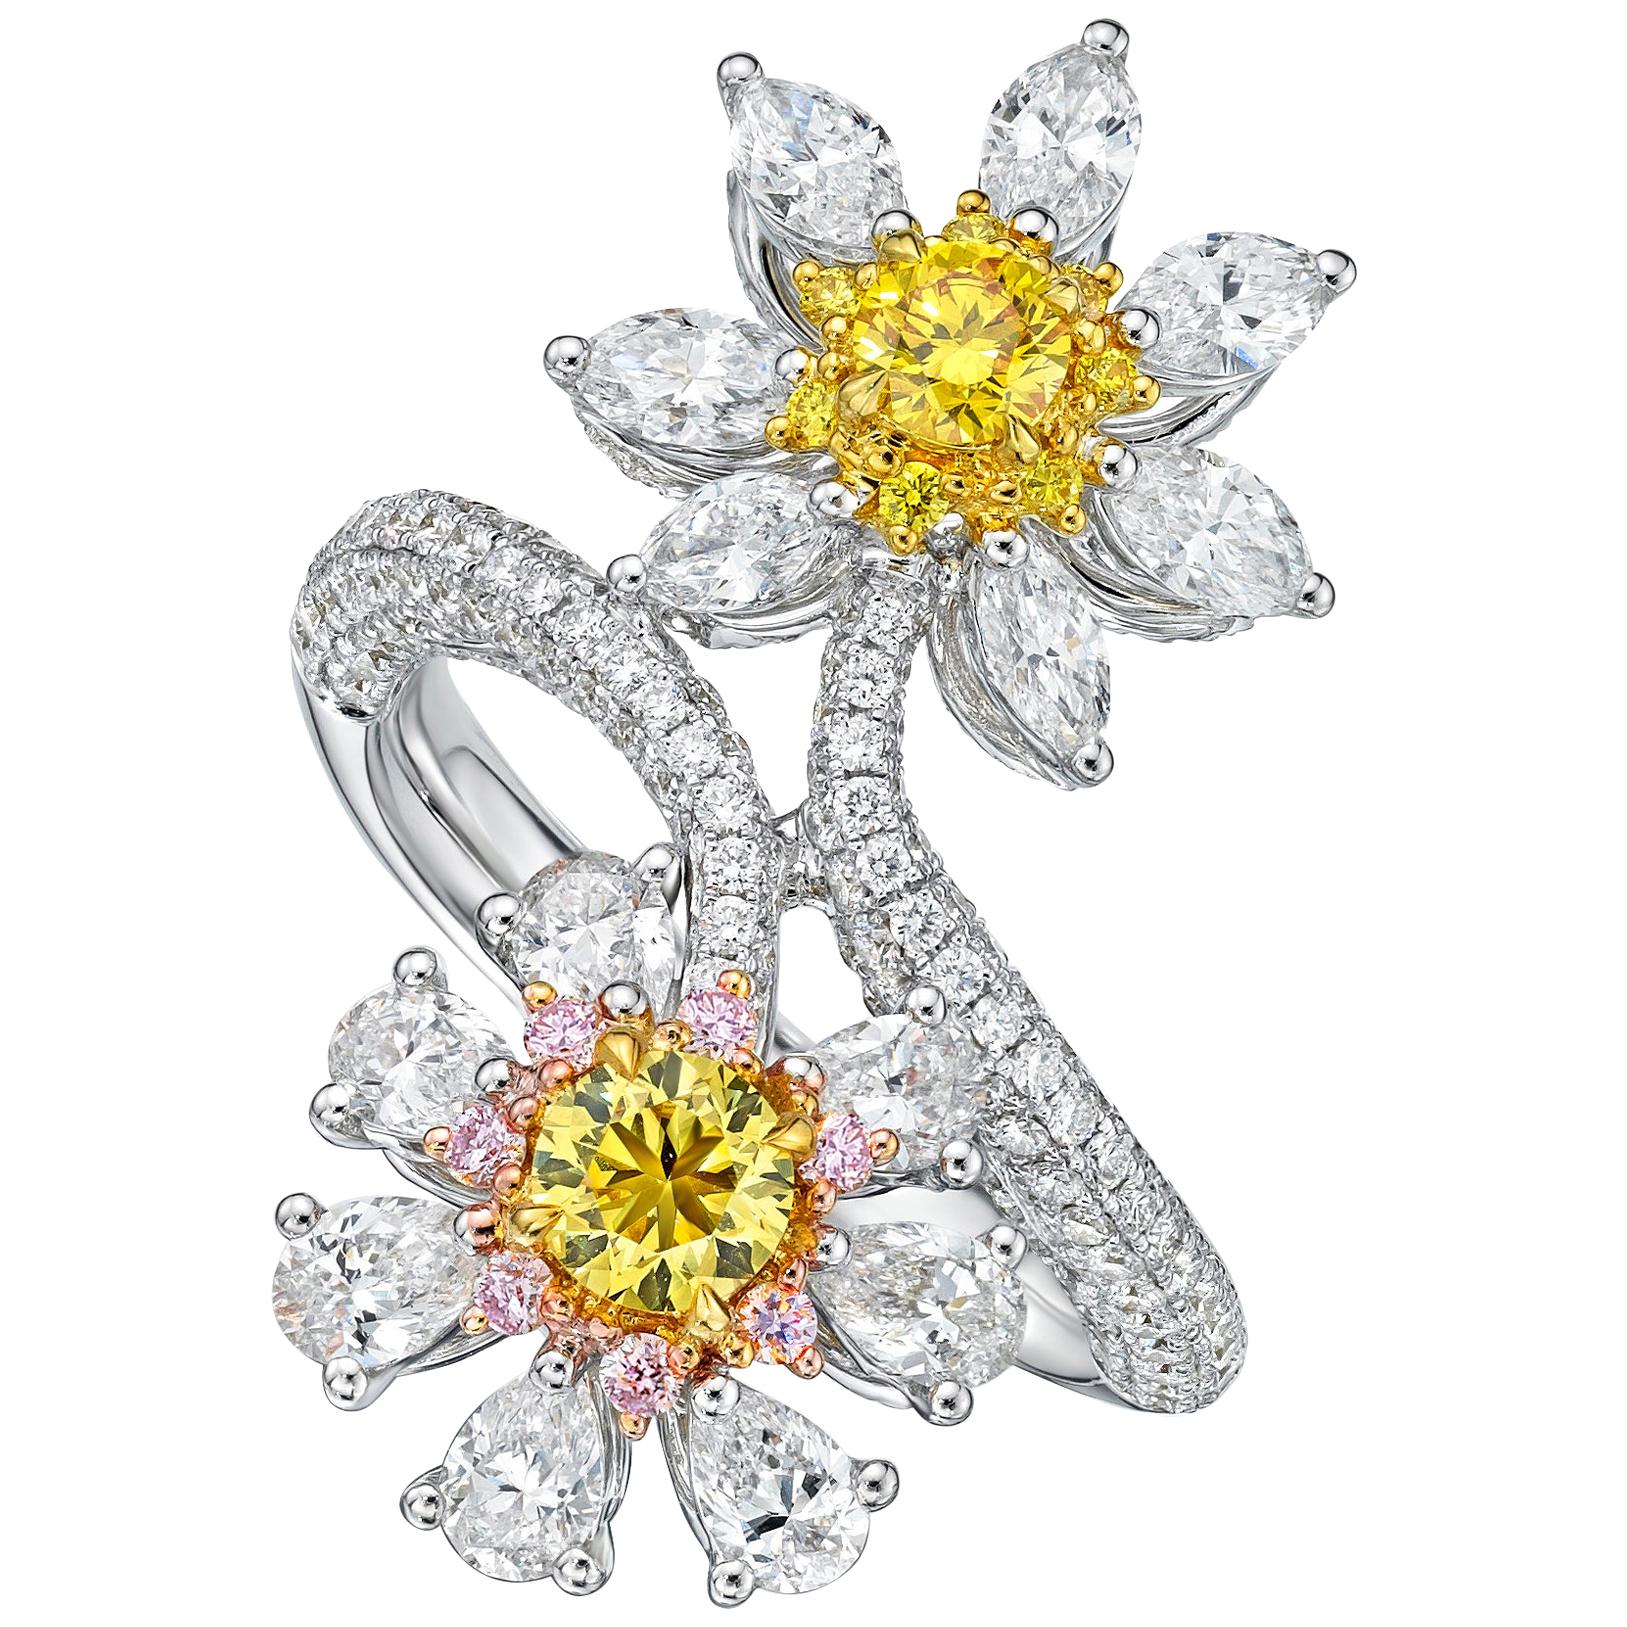 18 Karat Gold and Diamond Ring with 2 GIA Certified Fancy Vivid Yellow Diamonds For Sale